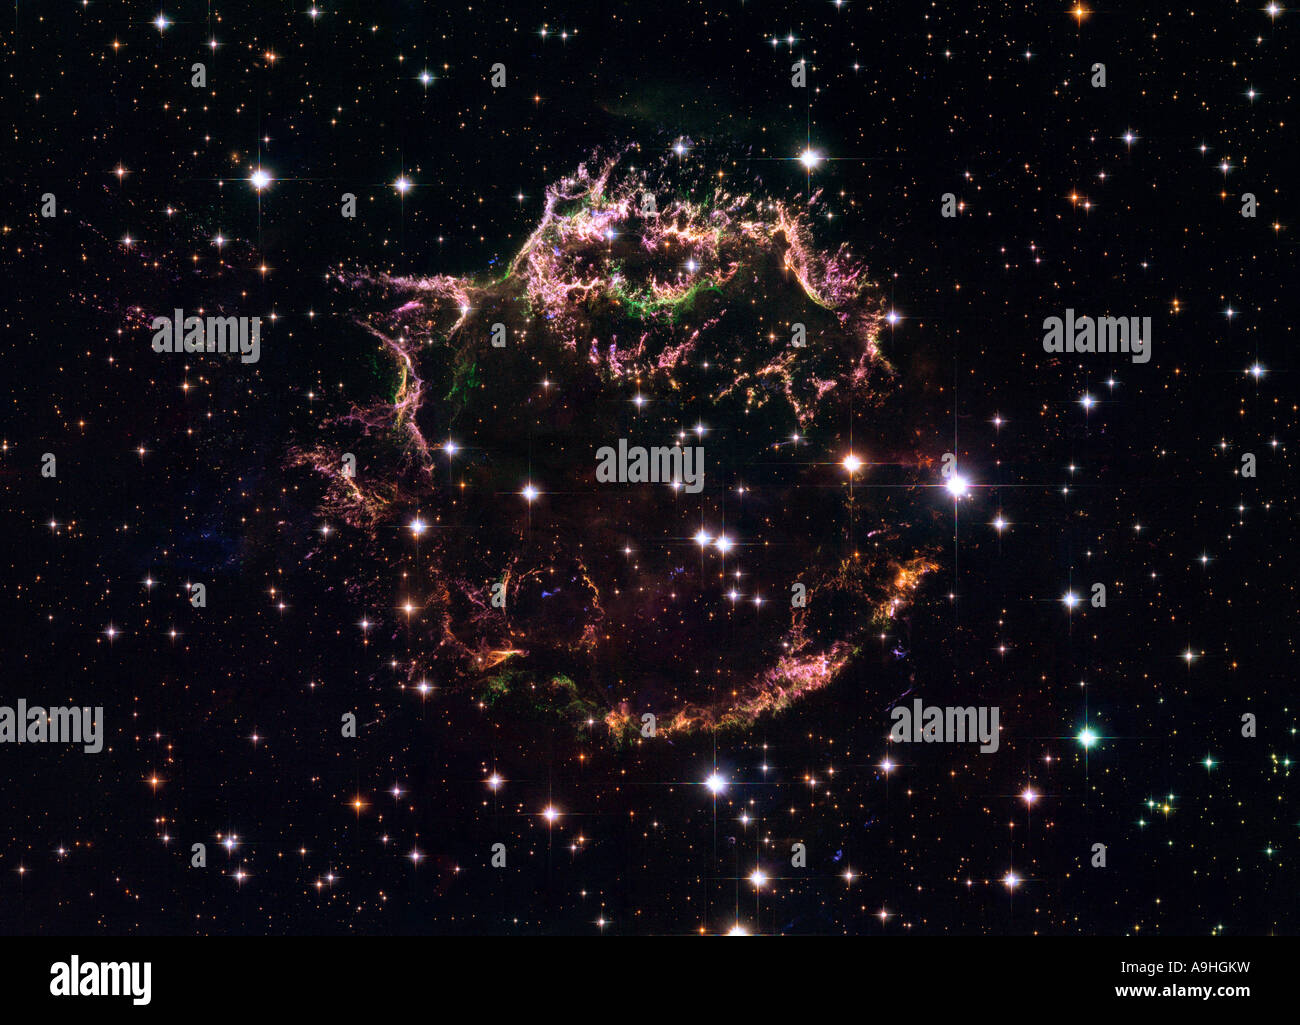 Supernova Remnant Cassiopeia A from the Hubble Space Telescope Stock Photo